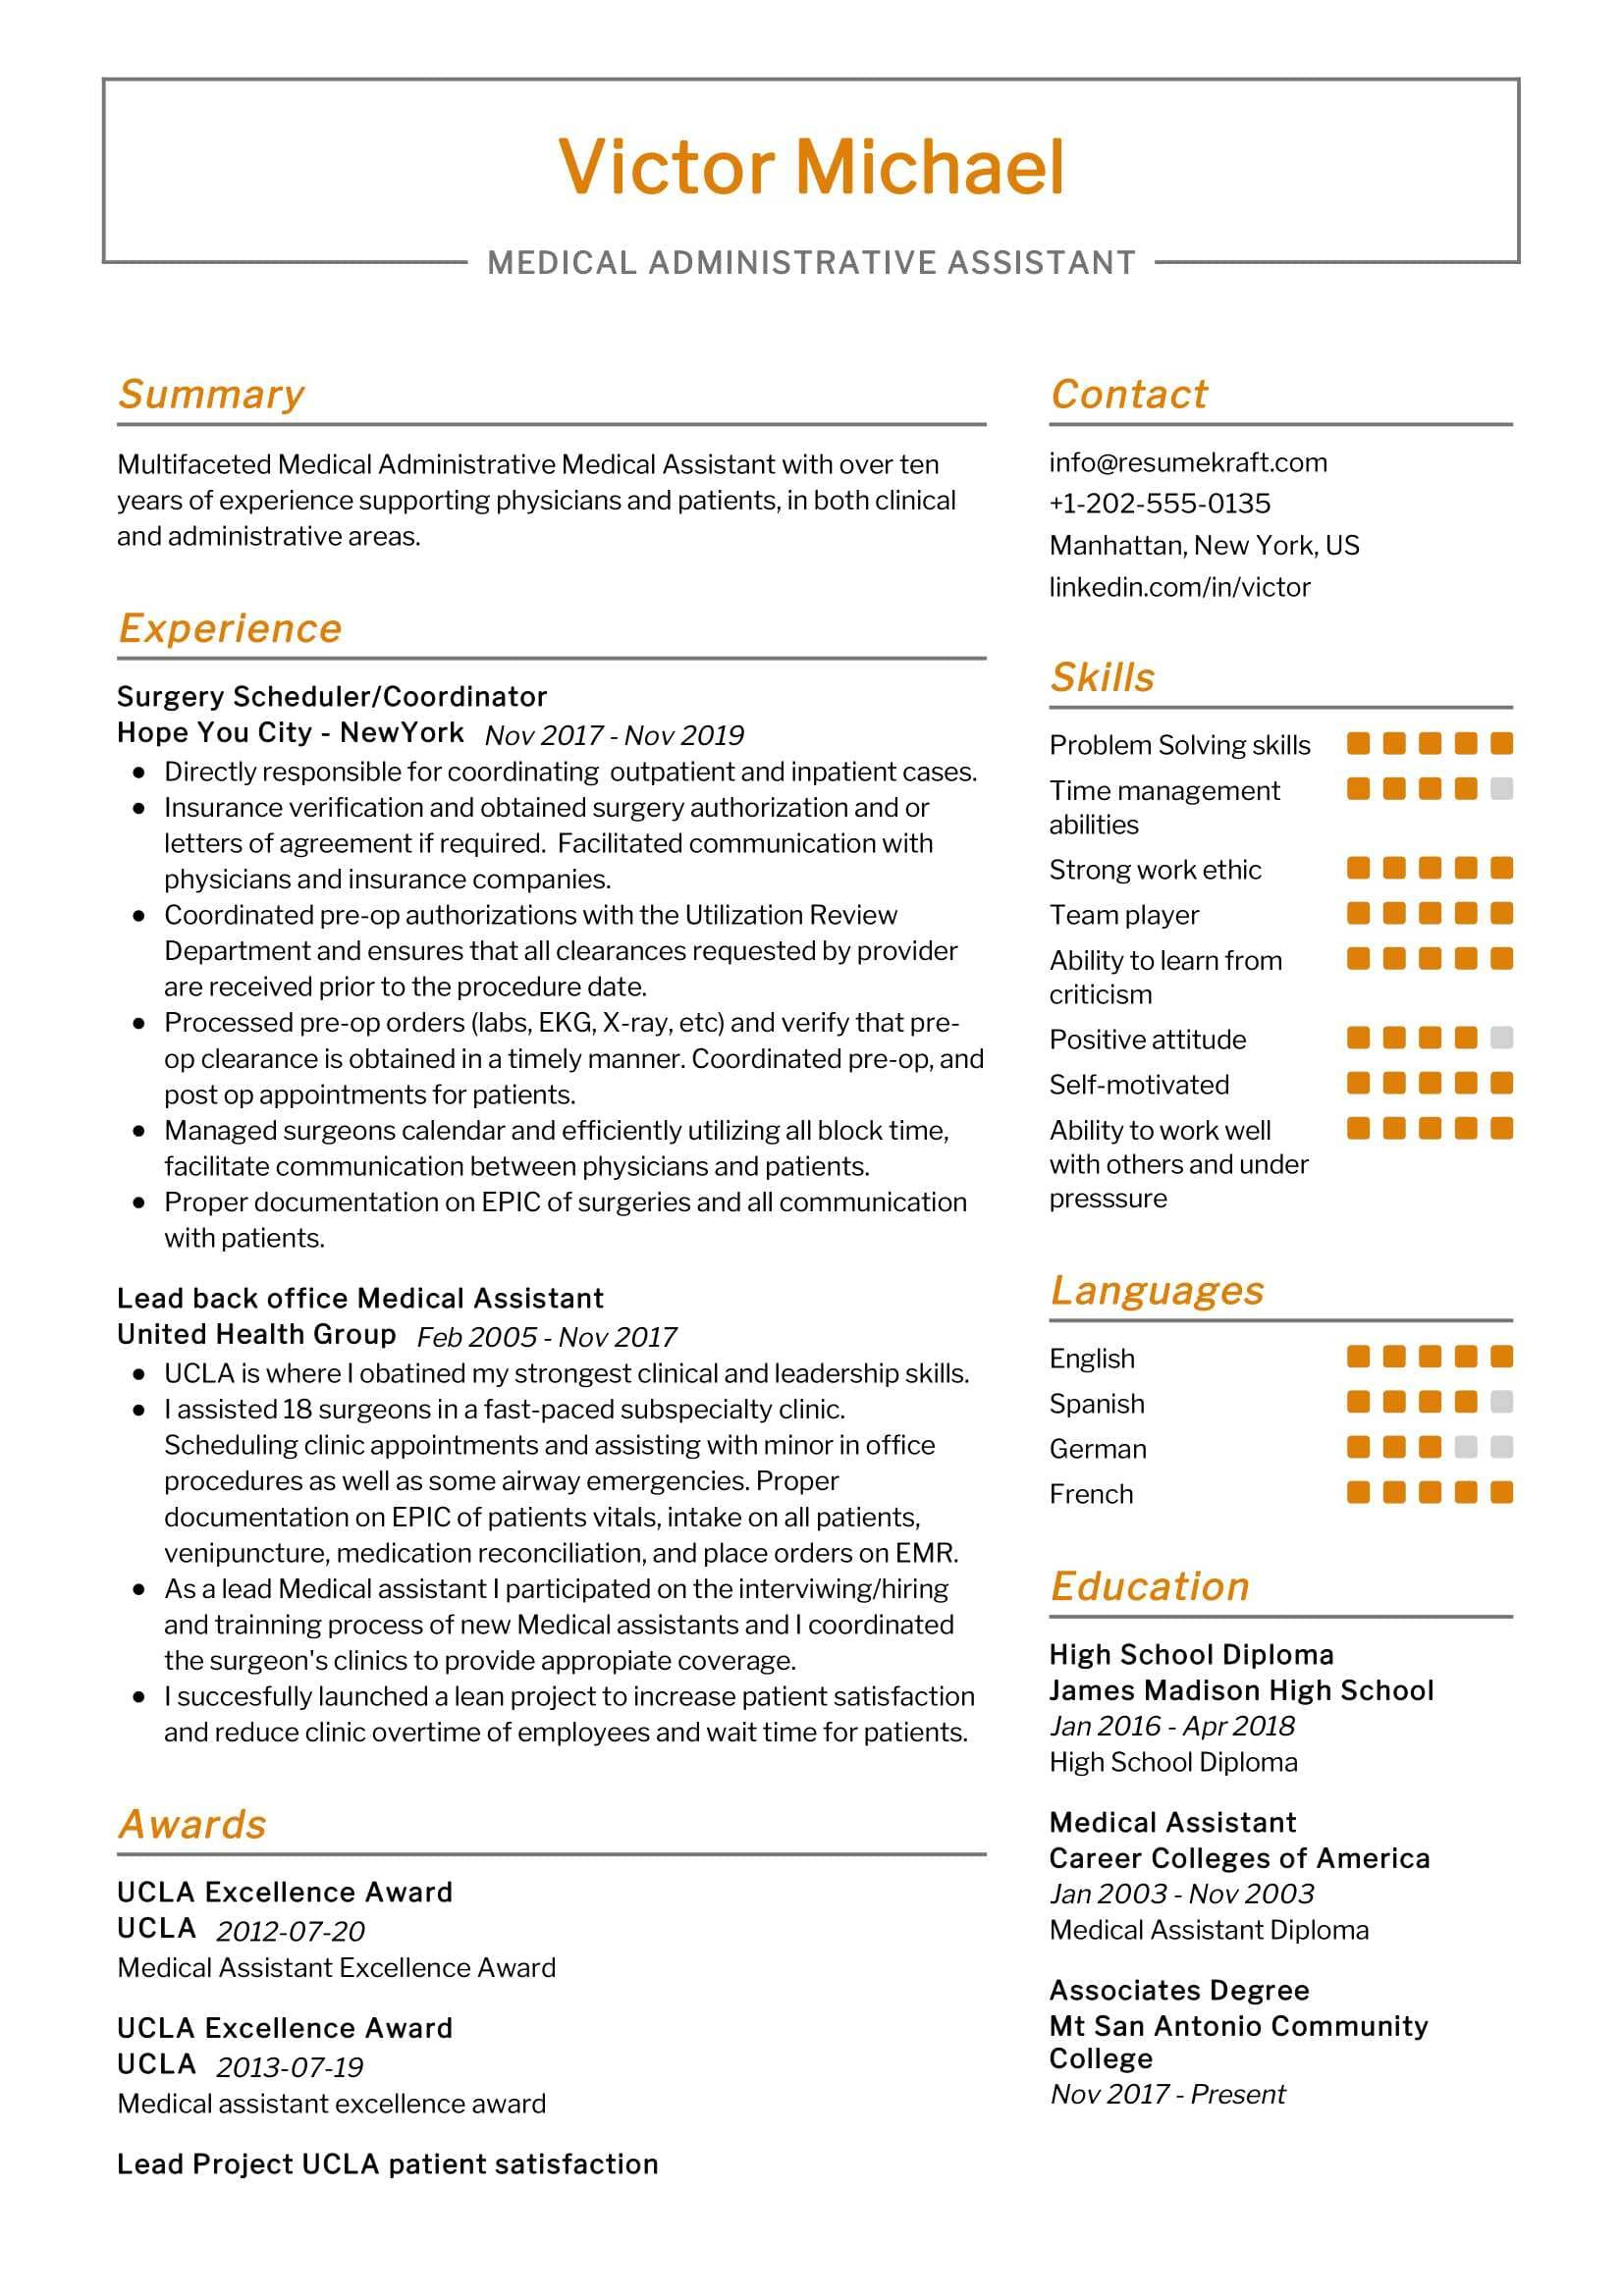 Direct Support Professional and Medical Clerk Resume Sample Medical Administrative assistant Resume Sample 2022 Writing Tips …